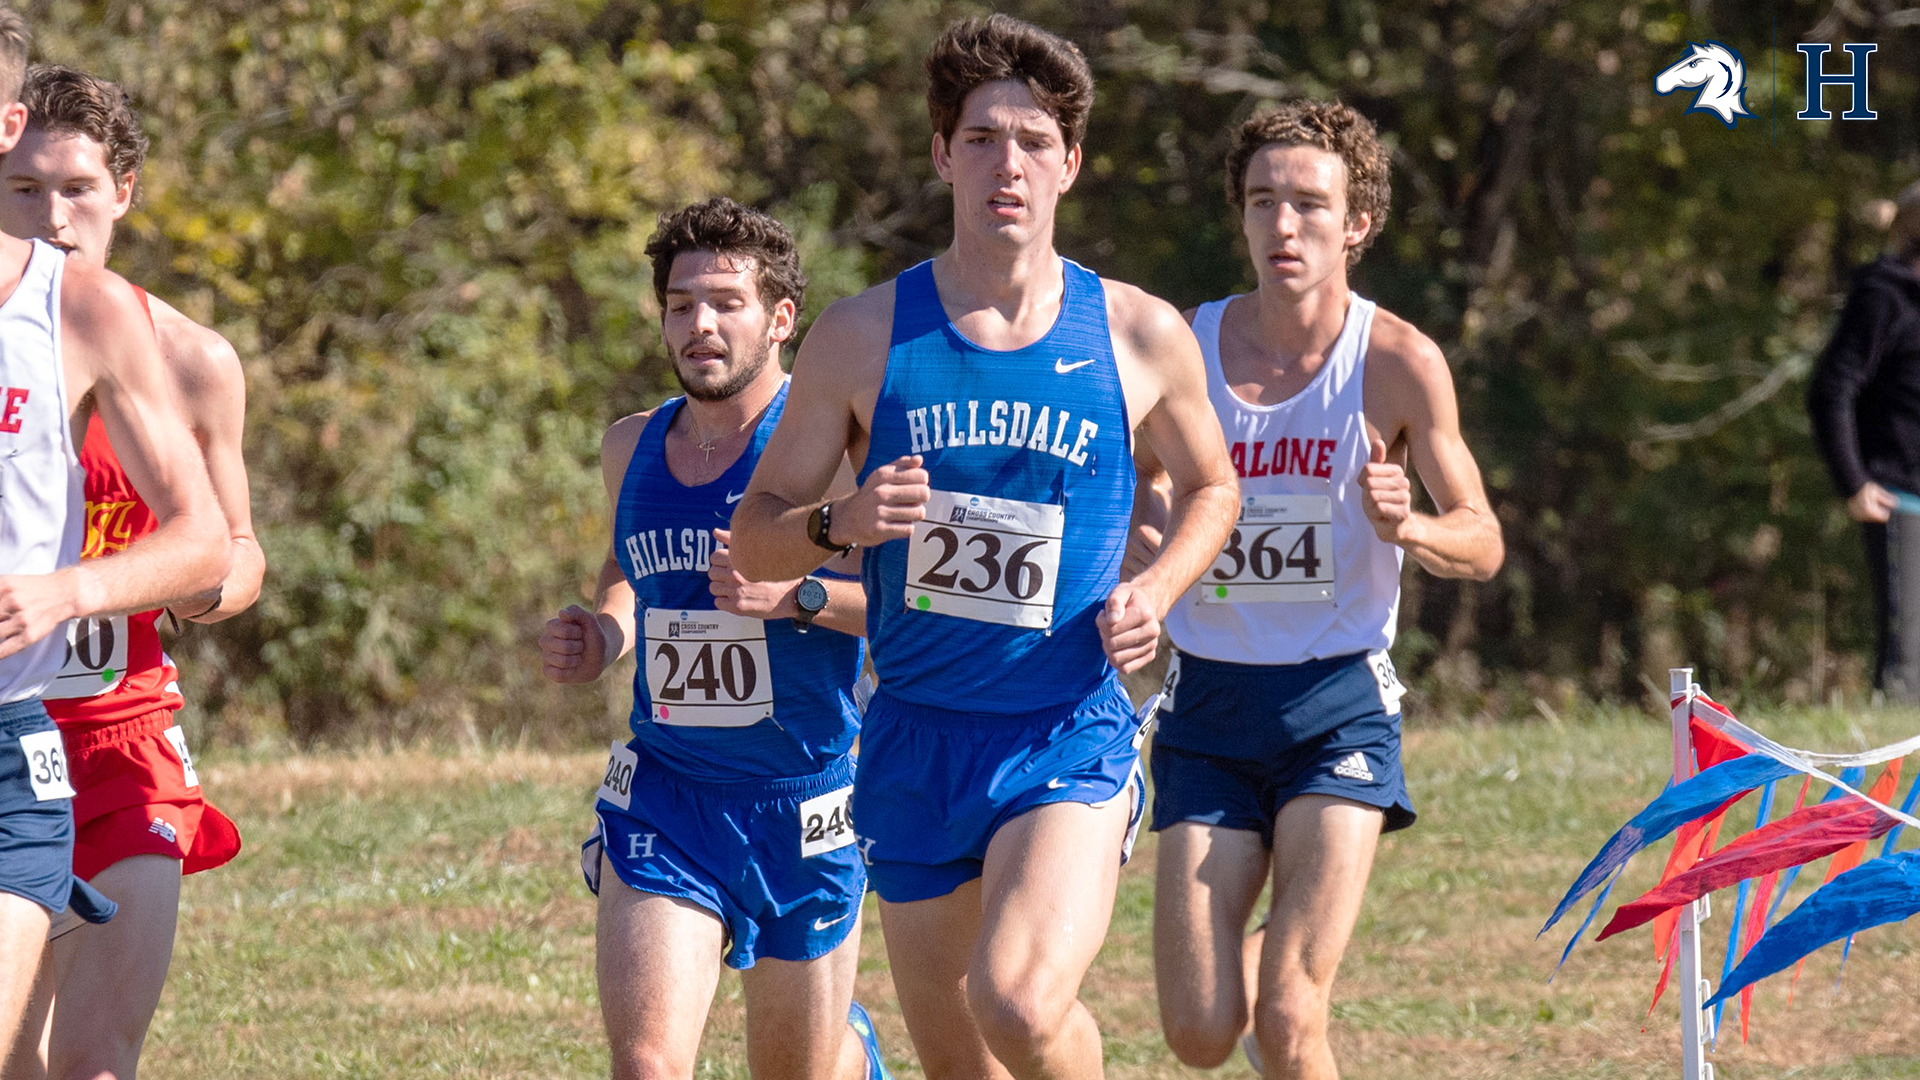 Charger men wrap up season with 19th place finish at NCAA Midwest Regional